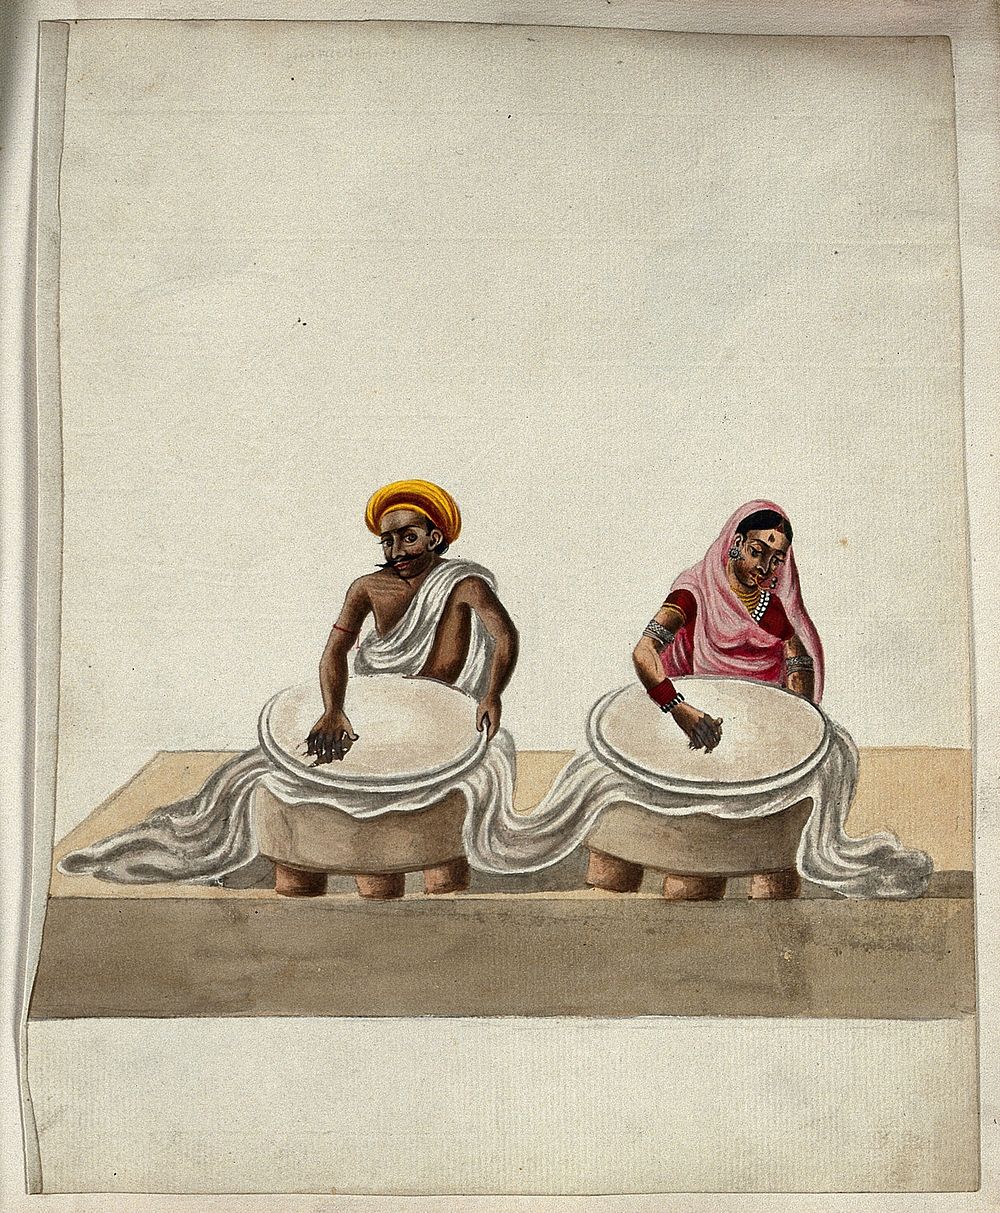 A man and a woman rubbing a piece of batik cloth . Gouache painting by an Indian artist.